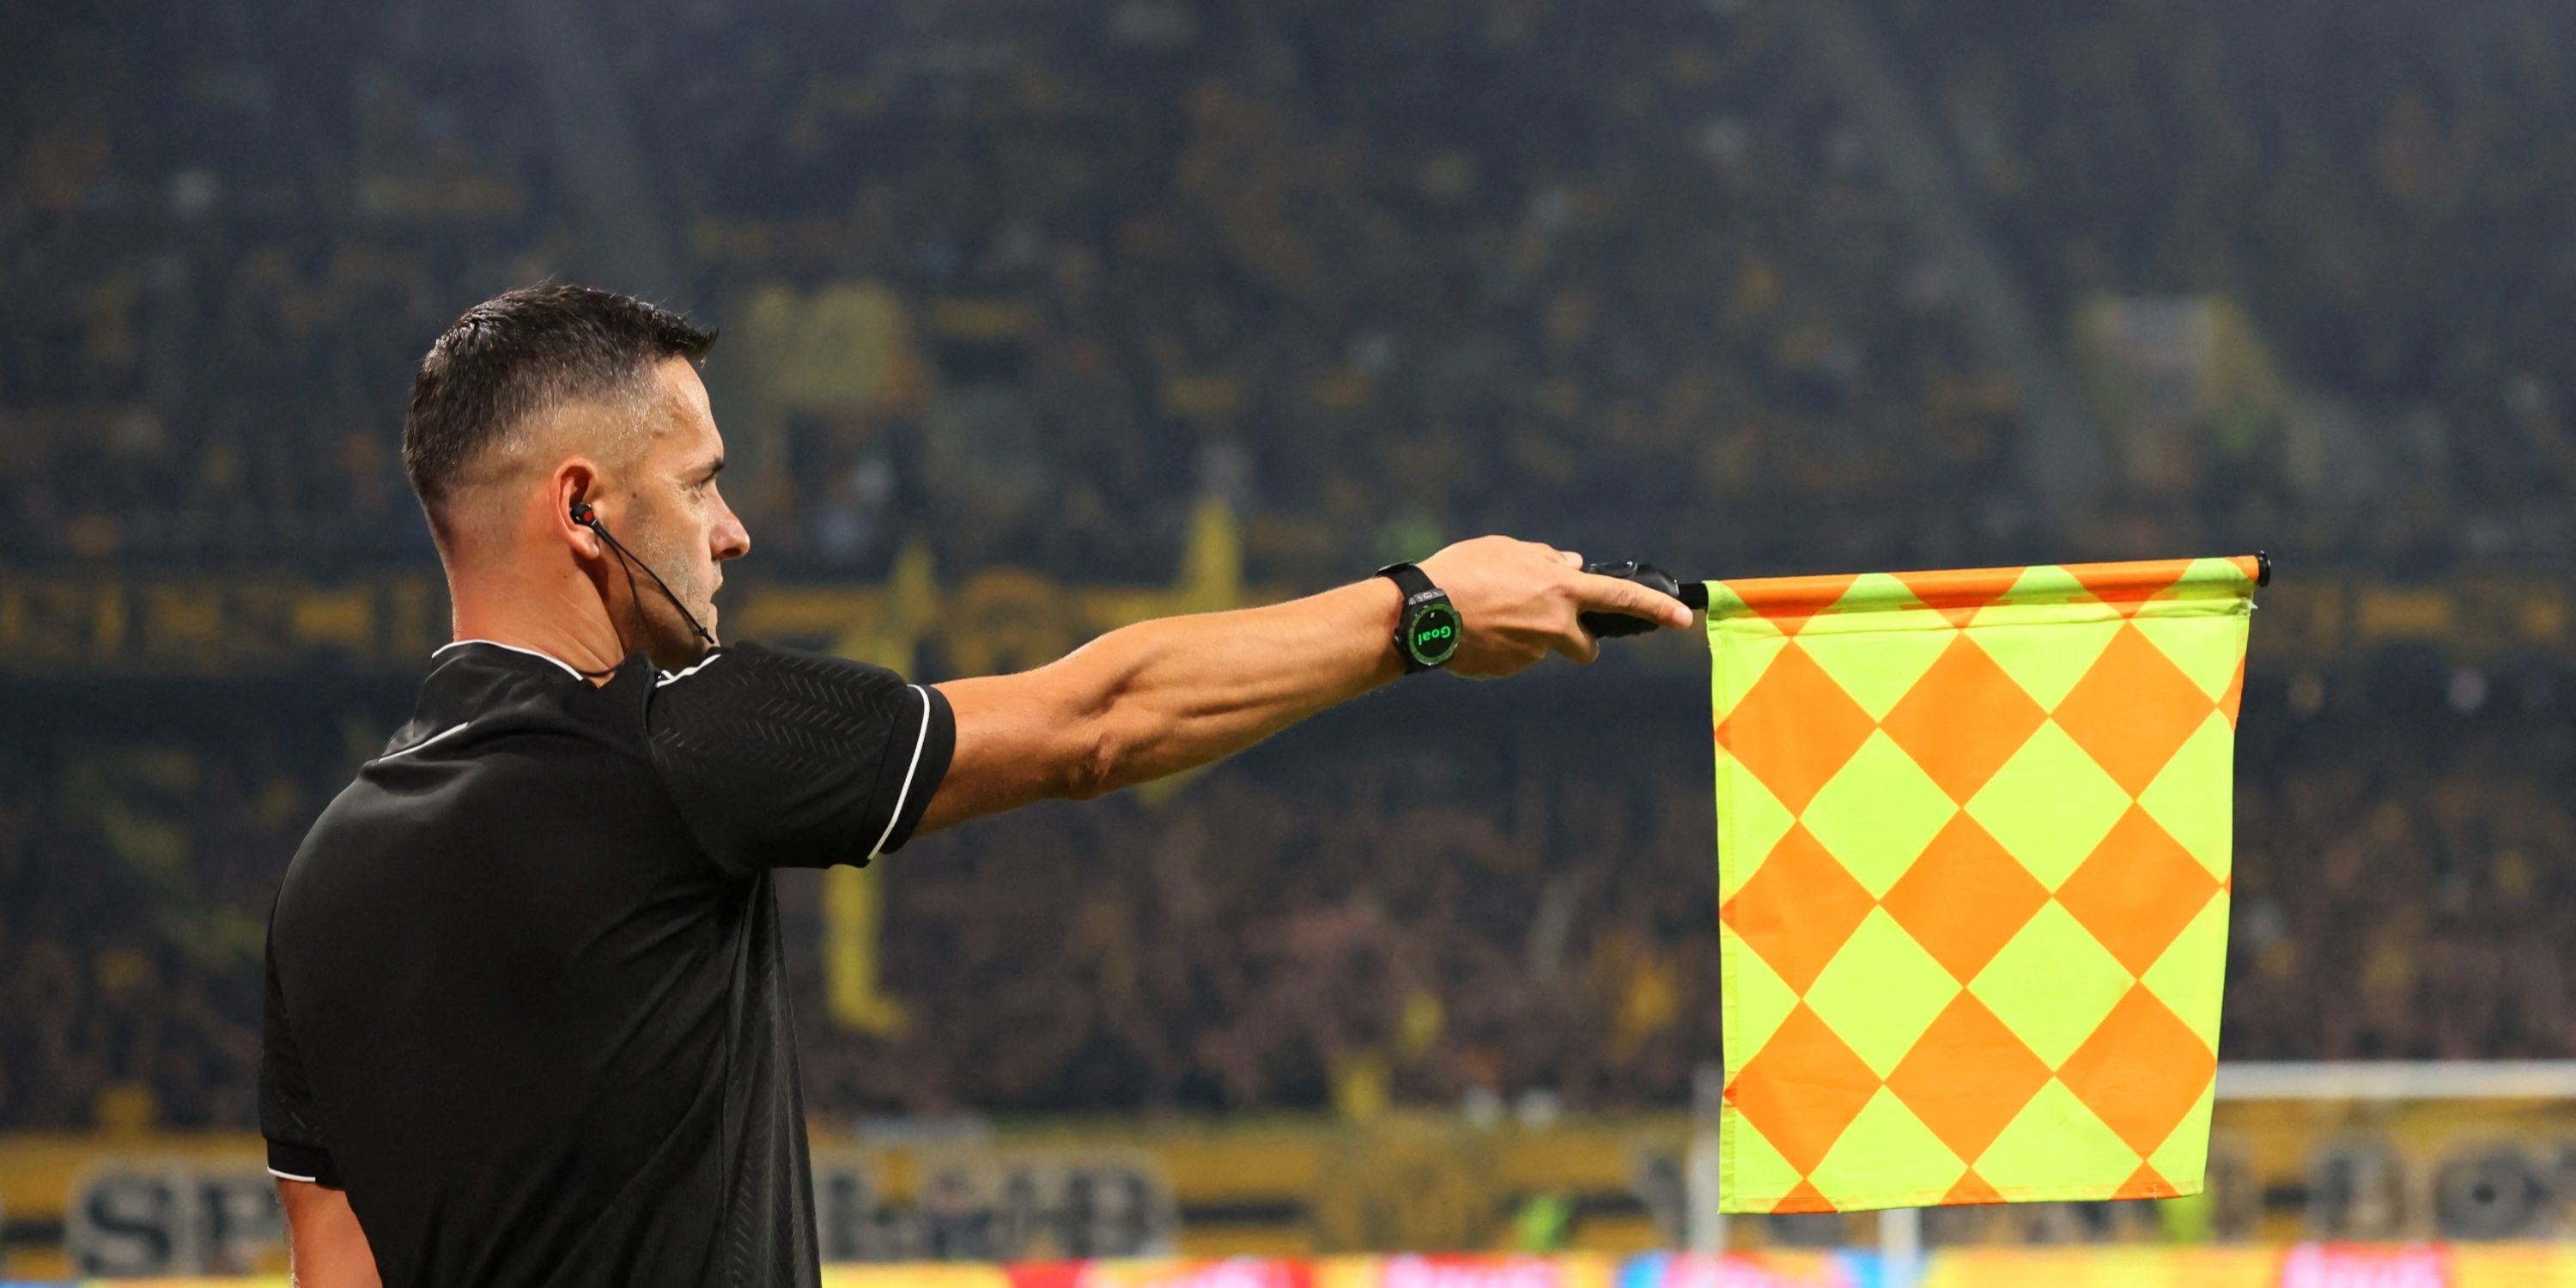 The linesman holding out his flag in a game of soccer.